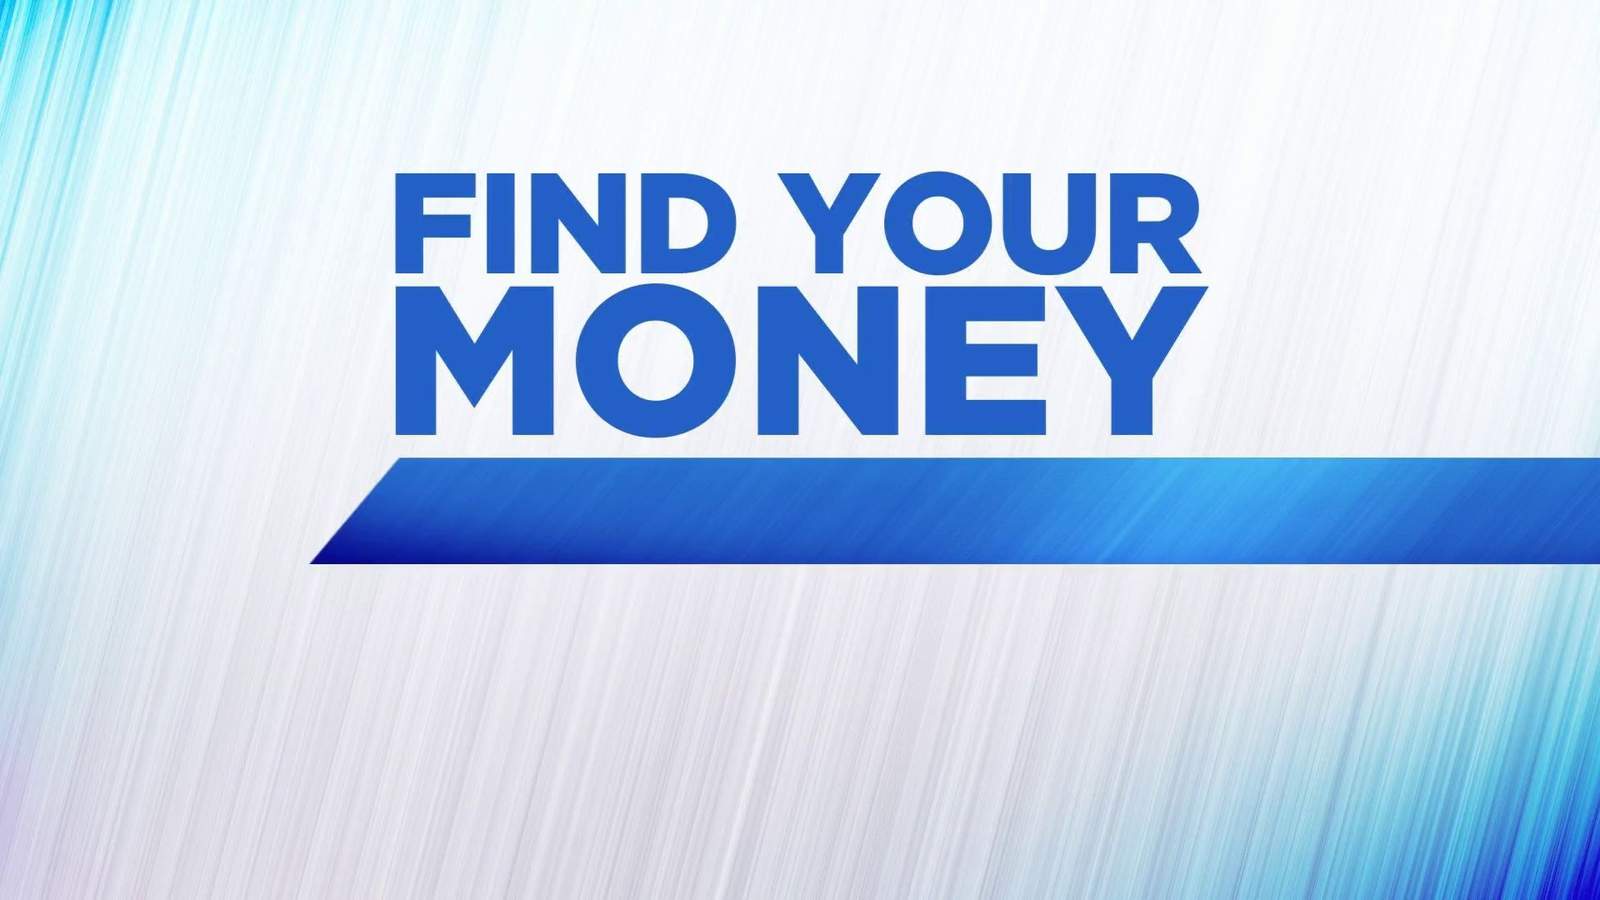 10 News is helping you ‘Find Your Money'